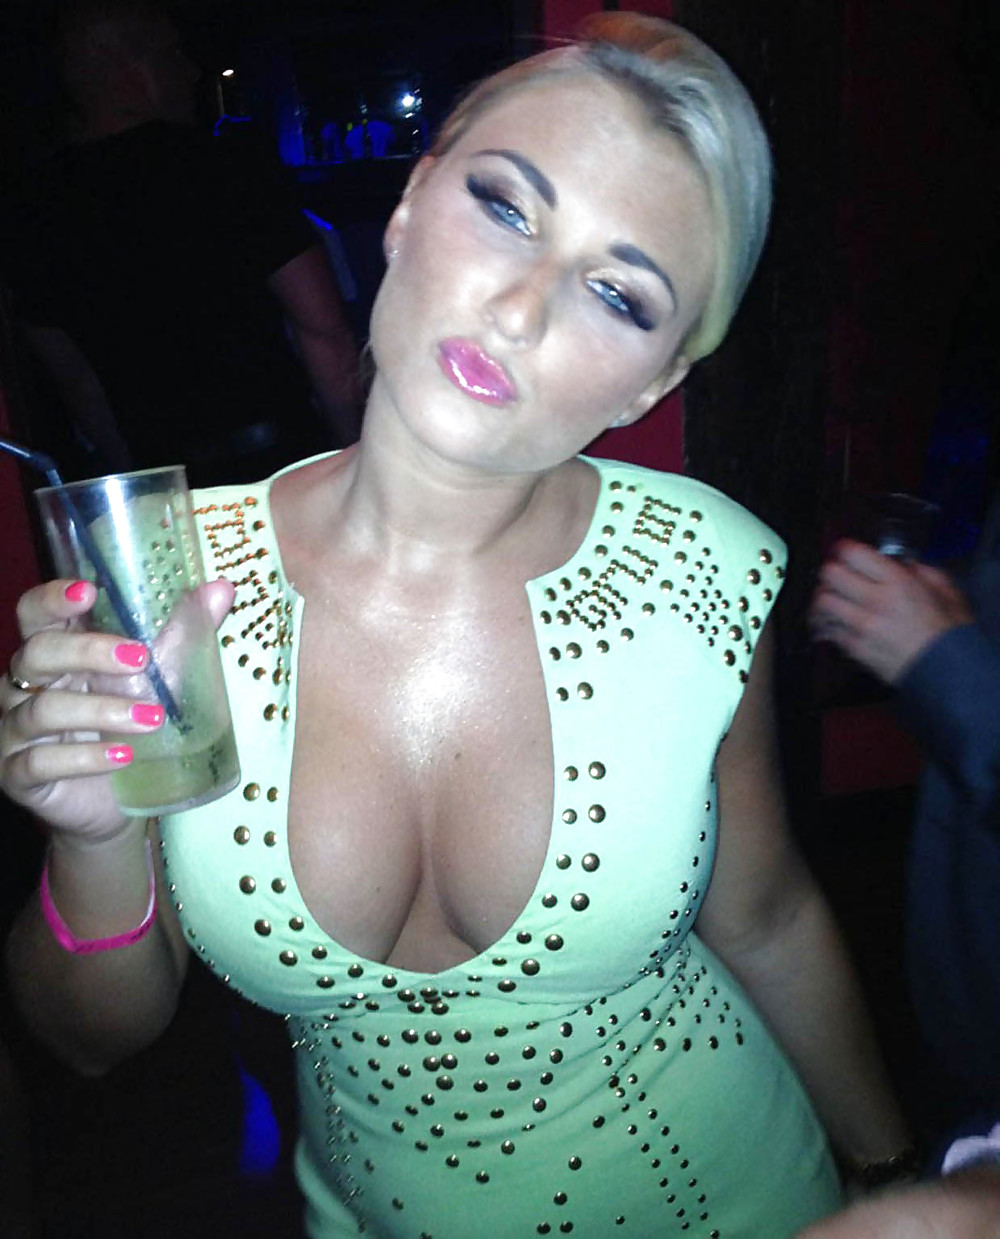 Billie Faiers - Is my Kind of Woman #15351646